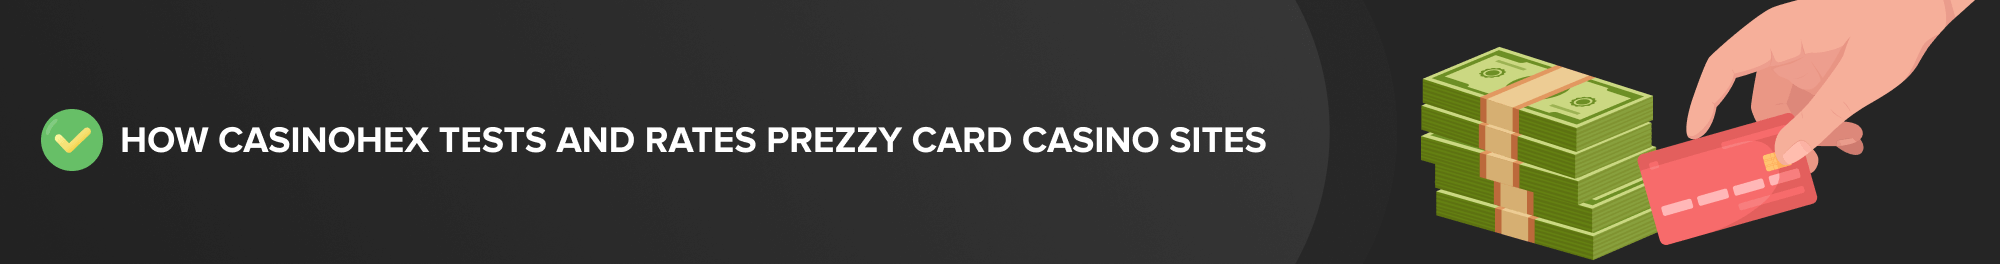 How we rate Prezzy Card casinos